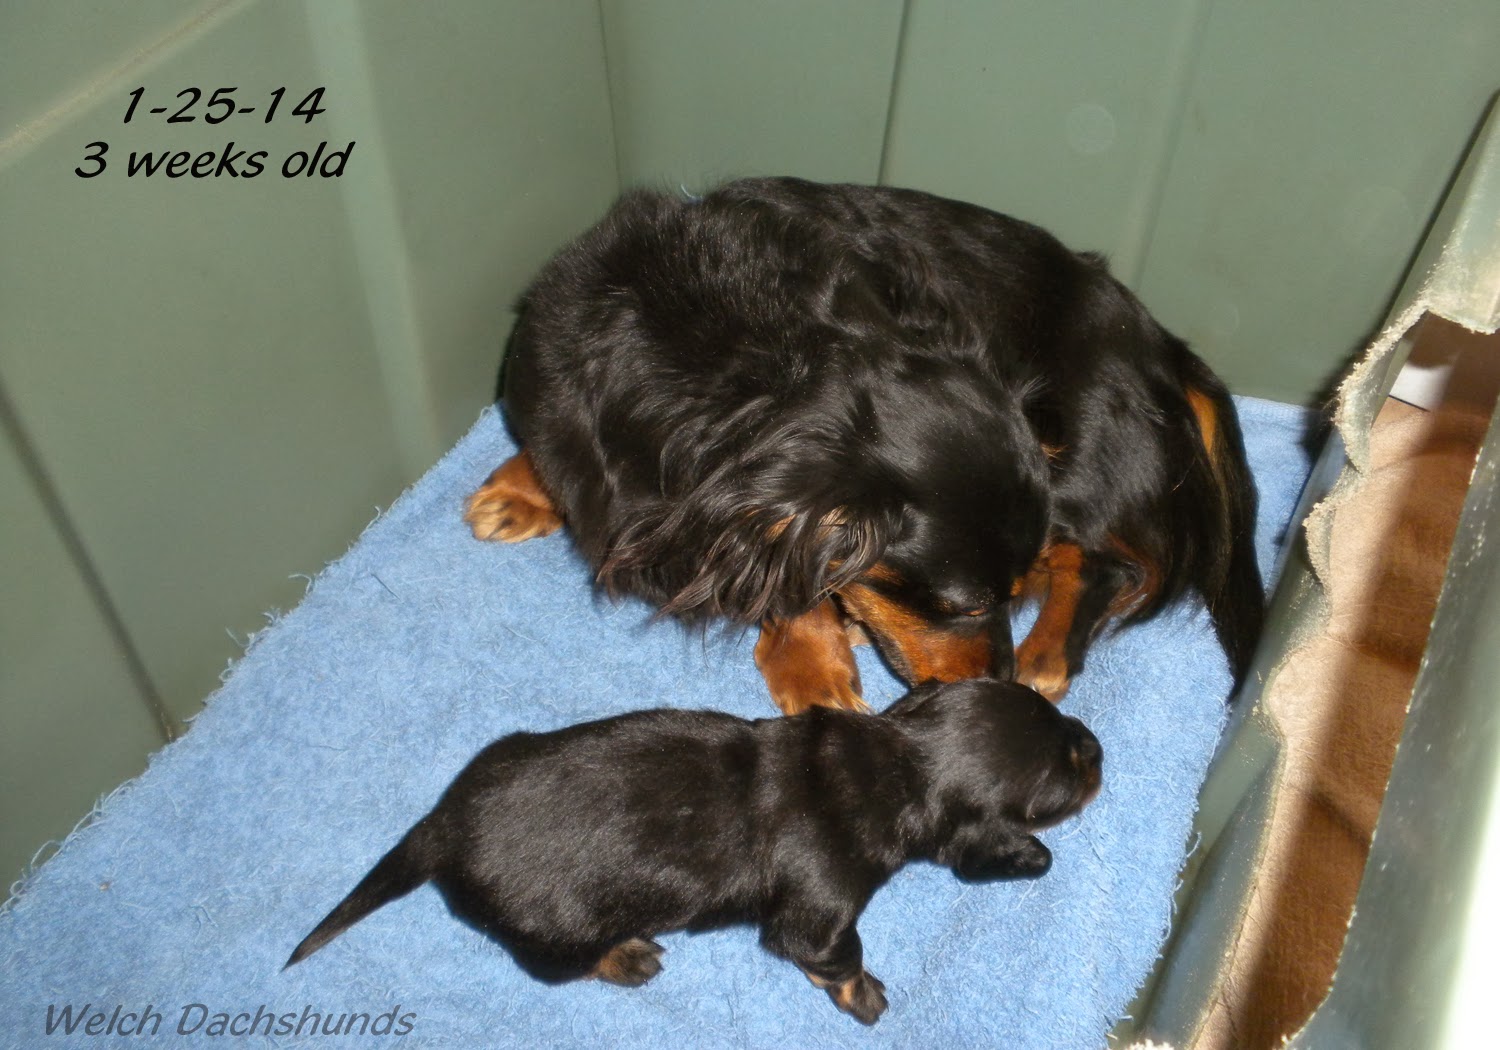 Welch Dachshunds: Whitney & her 3 week old puppy